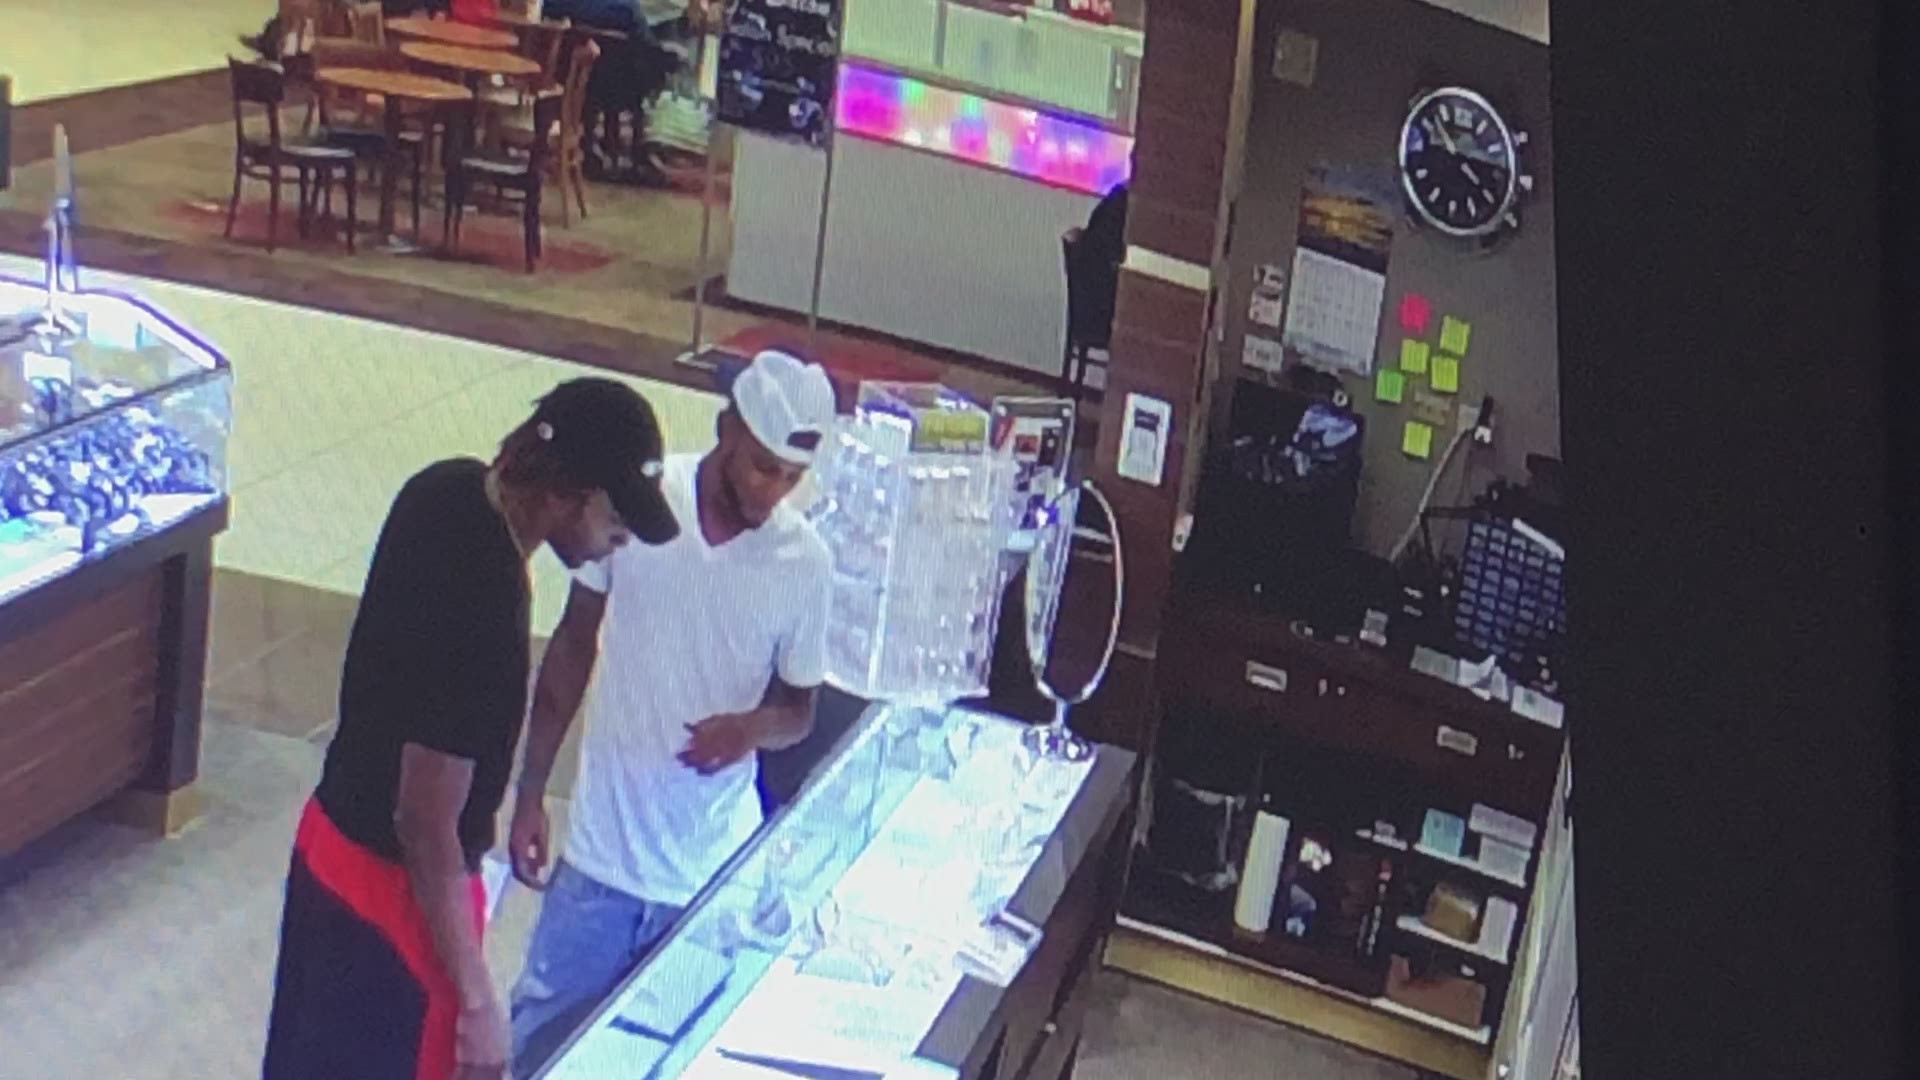 The suspects are accused of stealing a gold chain worth $10,000.